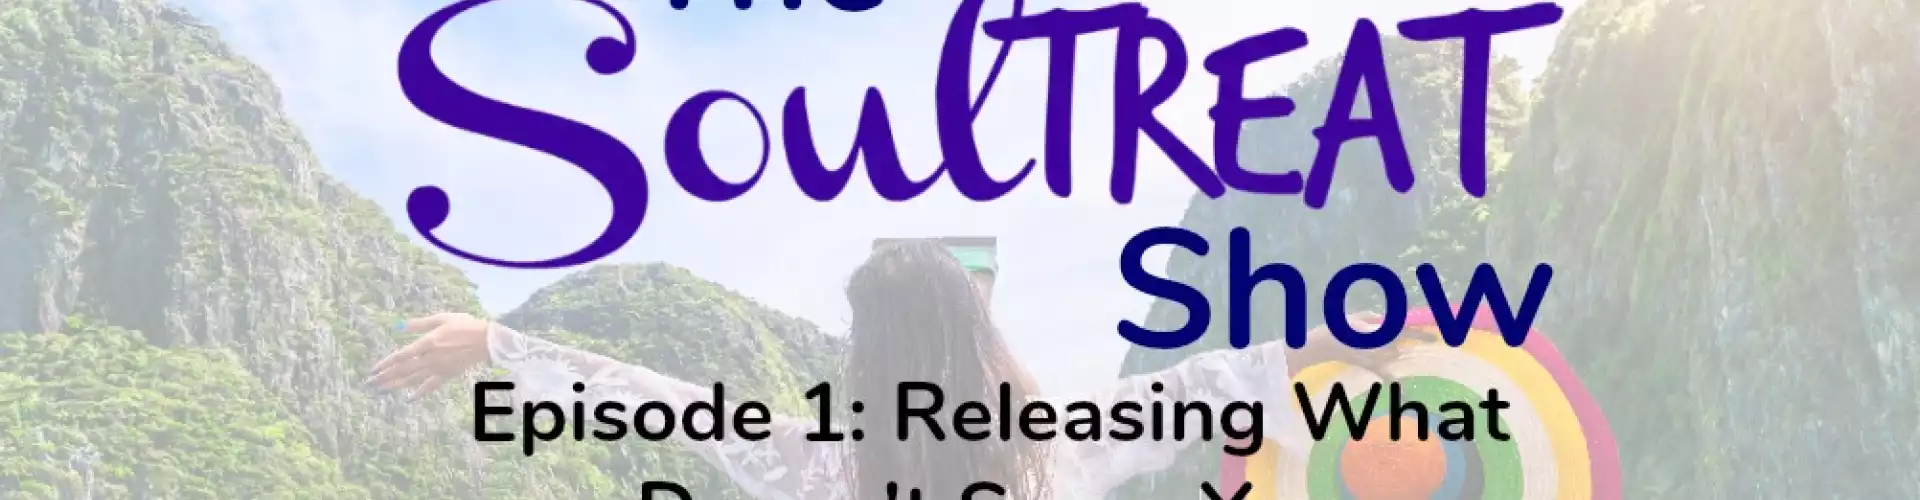 The SoulTreat Show Episode 1: Release 